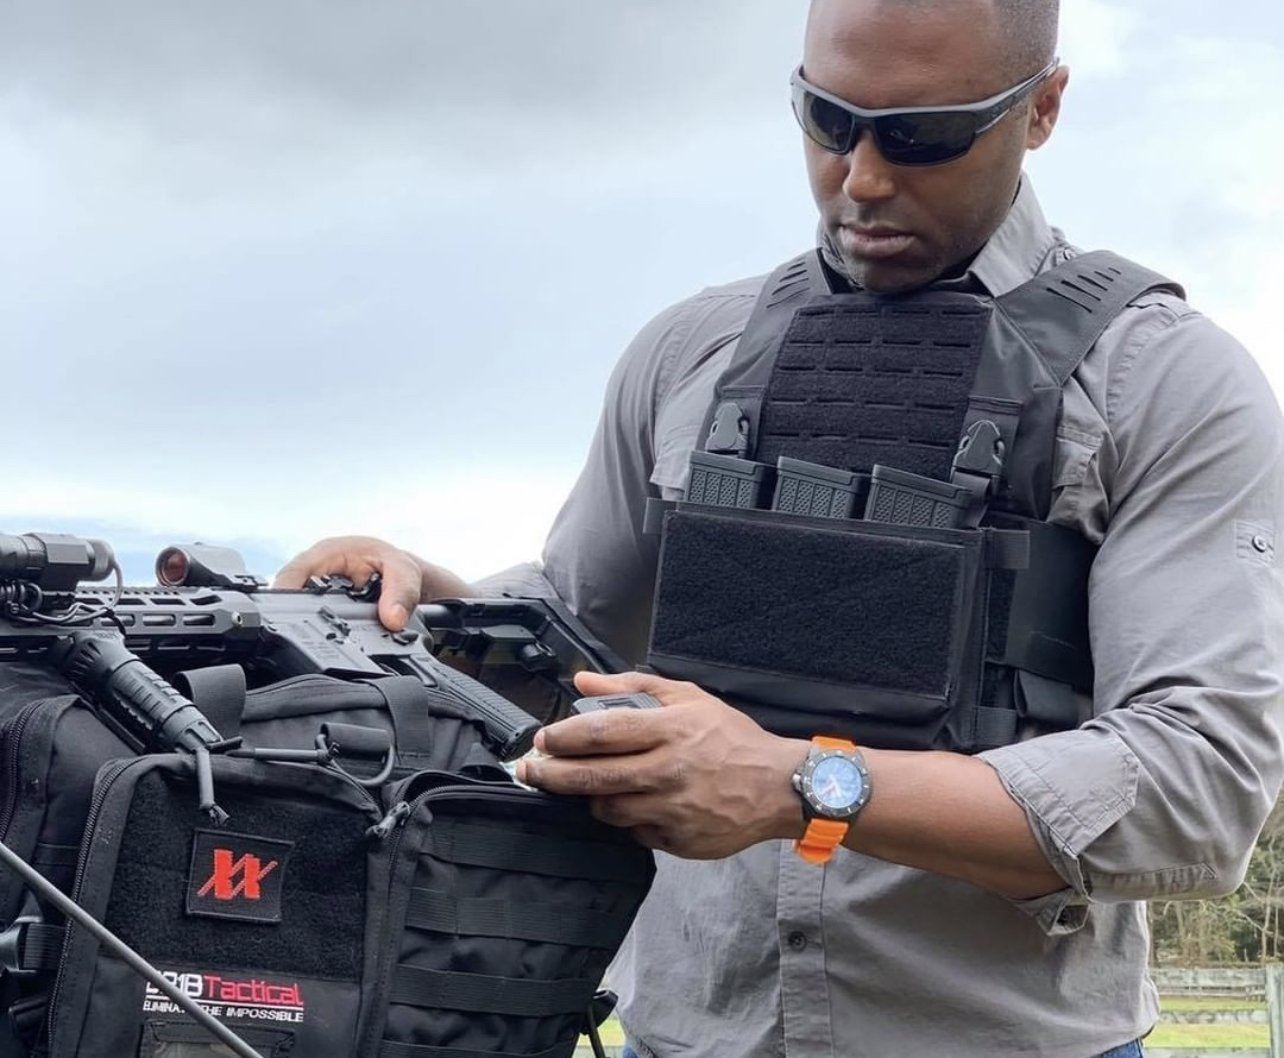 Body Armor 101: A Beginners Guide To Body Armor, Plates and Plate Carriers 2021